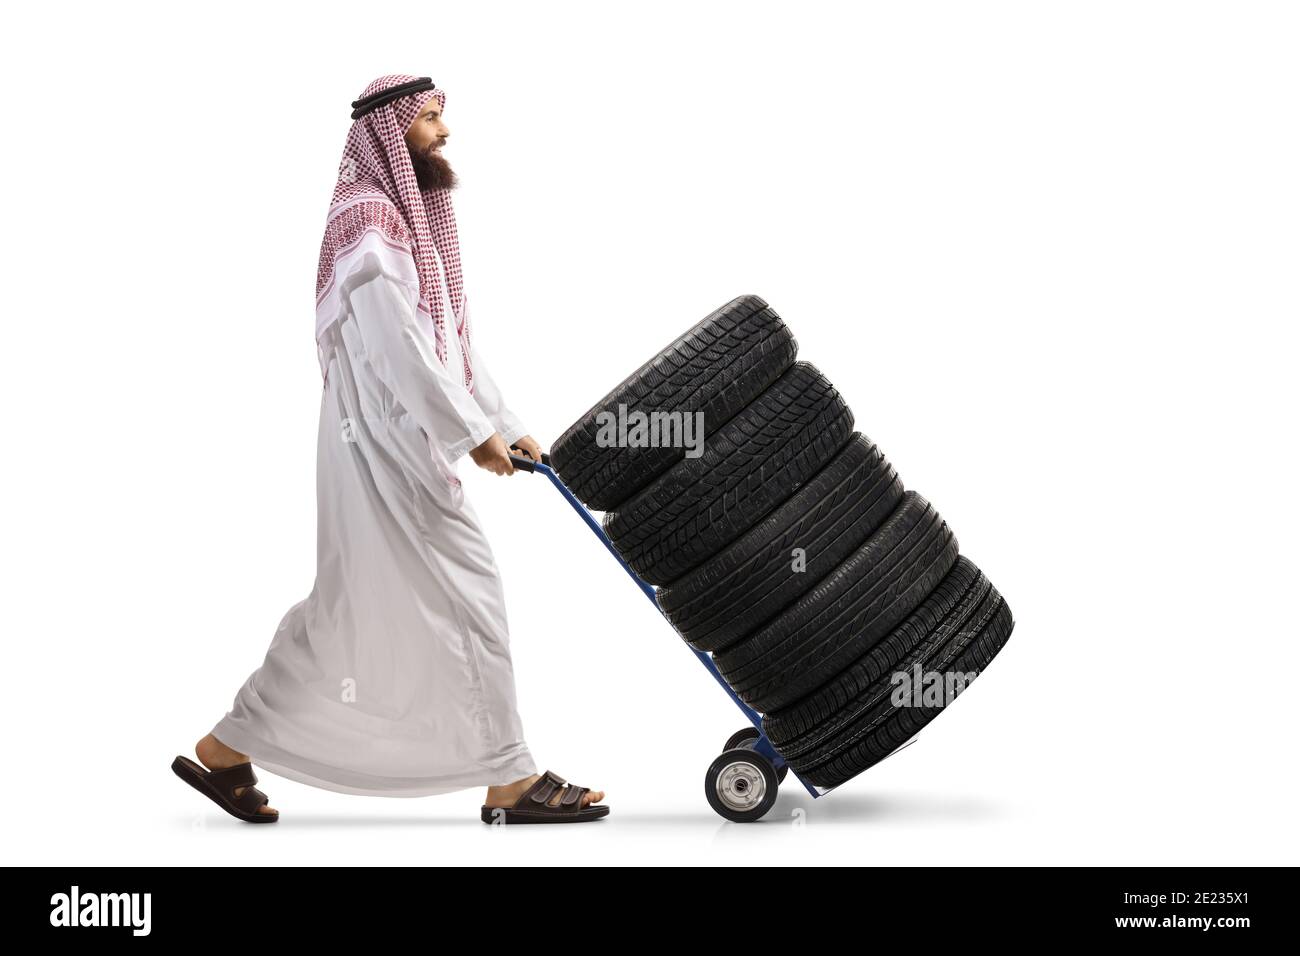 Full length profile shot of a saudi arab man wearing a thobe and pushing a hand truck with a tires isolated on white background Stock Photo